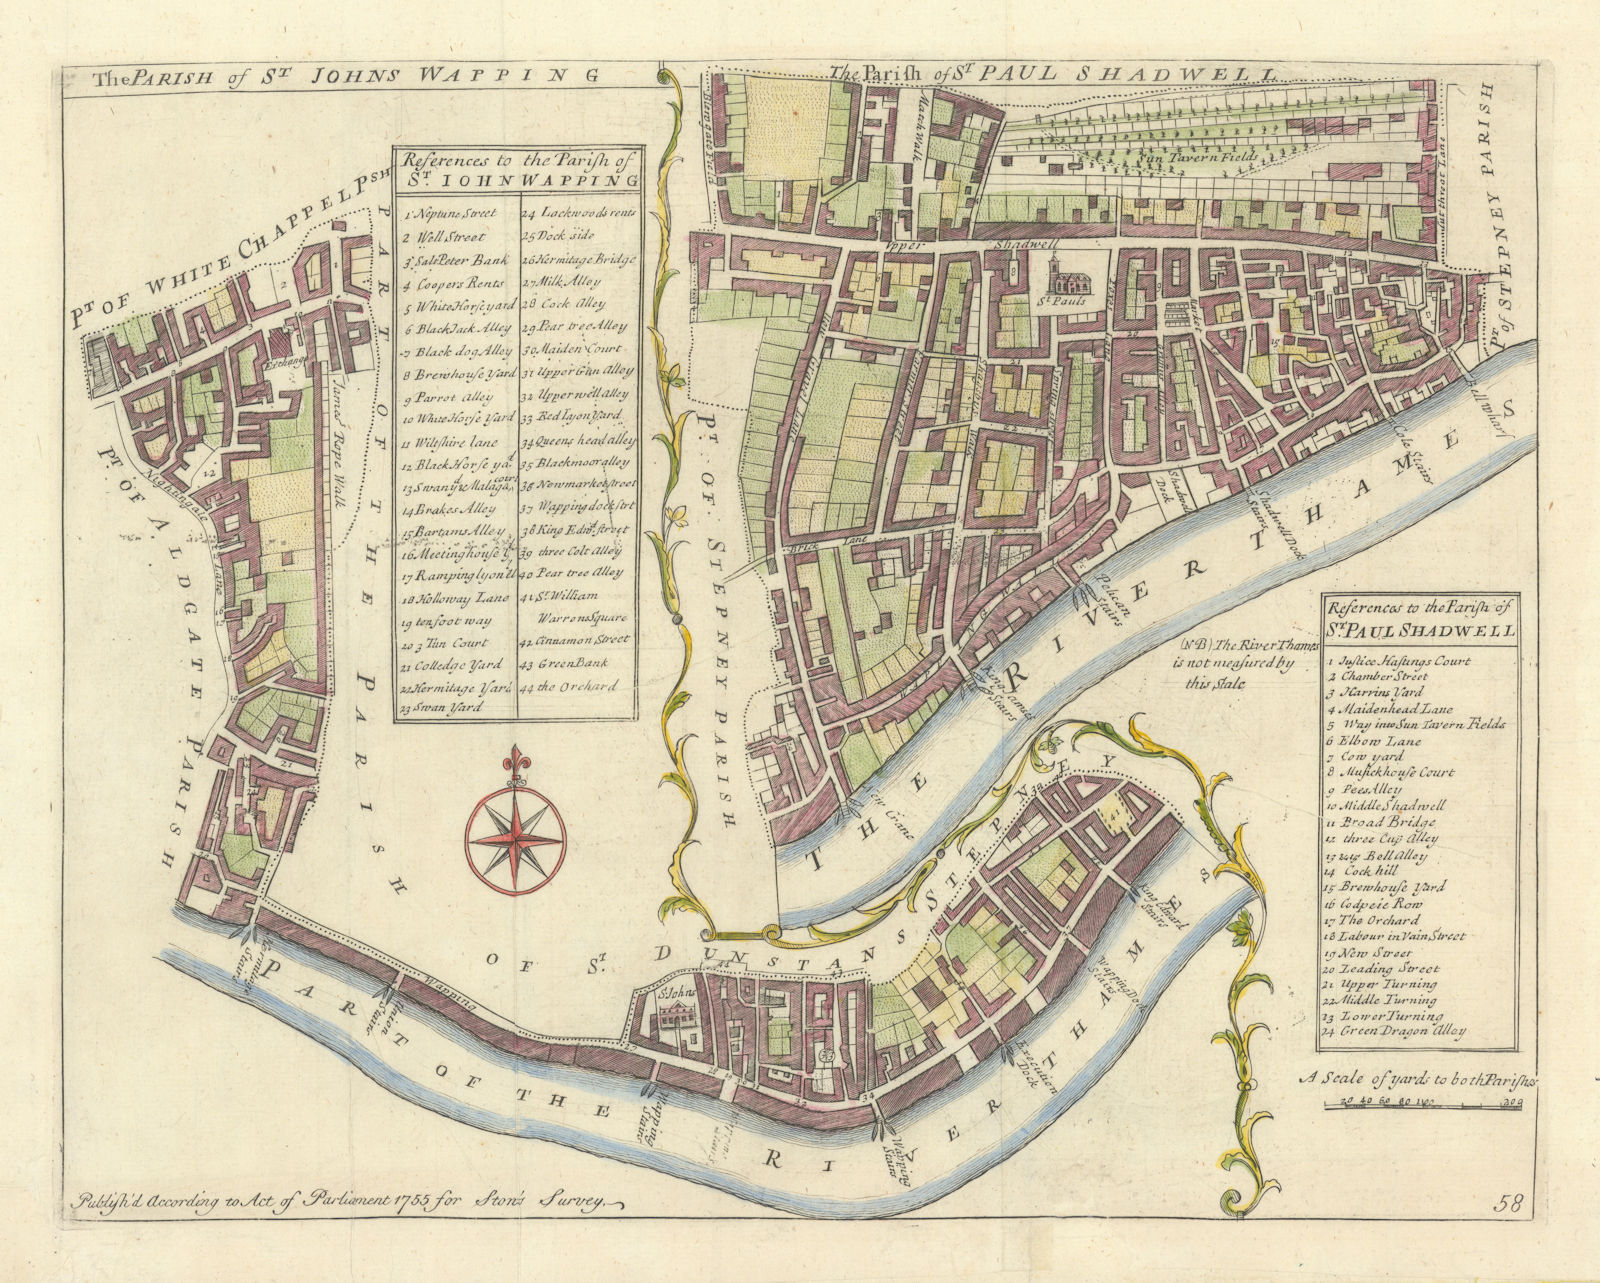 The parishes of St John's, Wapping & St Paul, Shadwell. STOW/STRYPE 1755 map